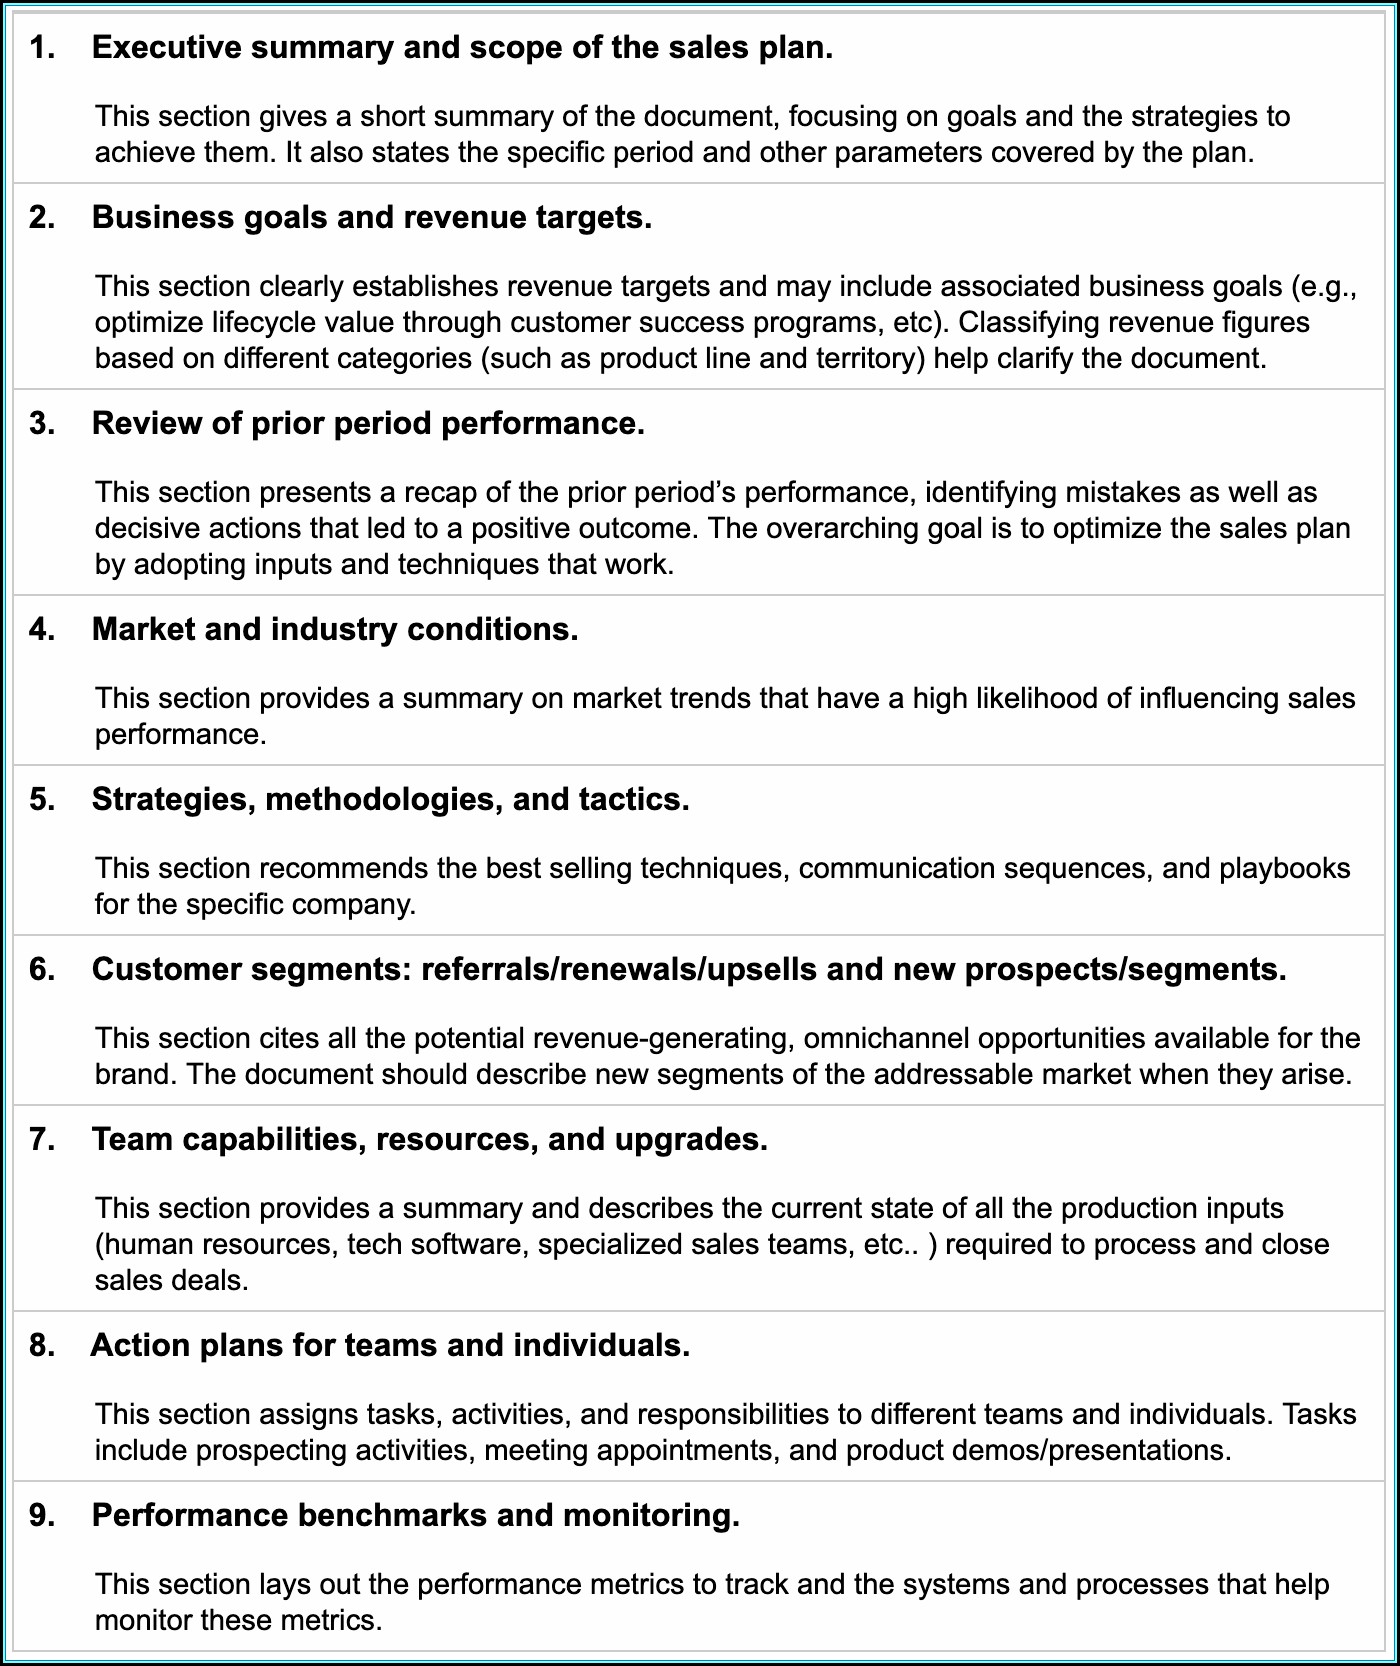 Sales Territory Business Plan Template